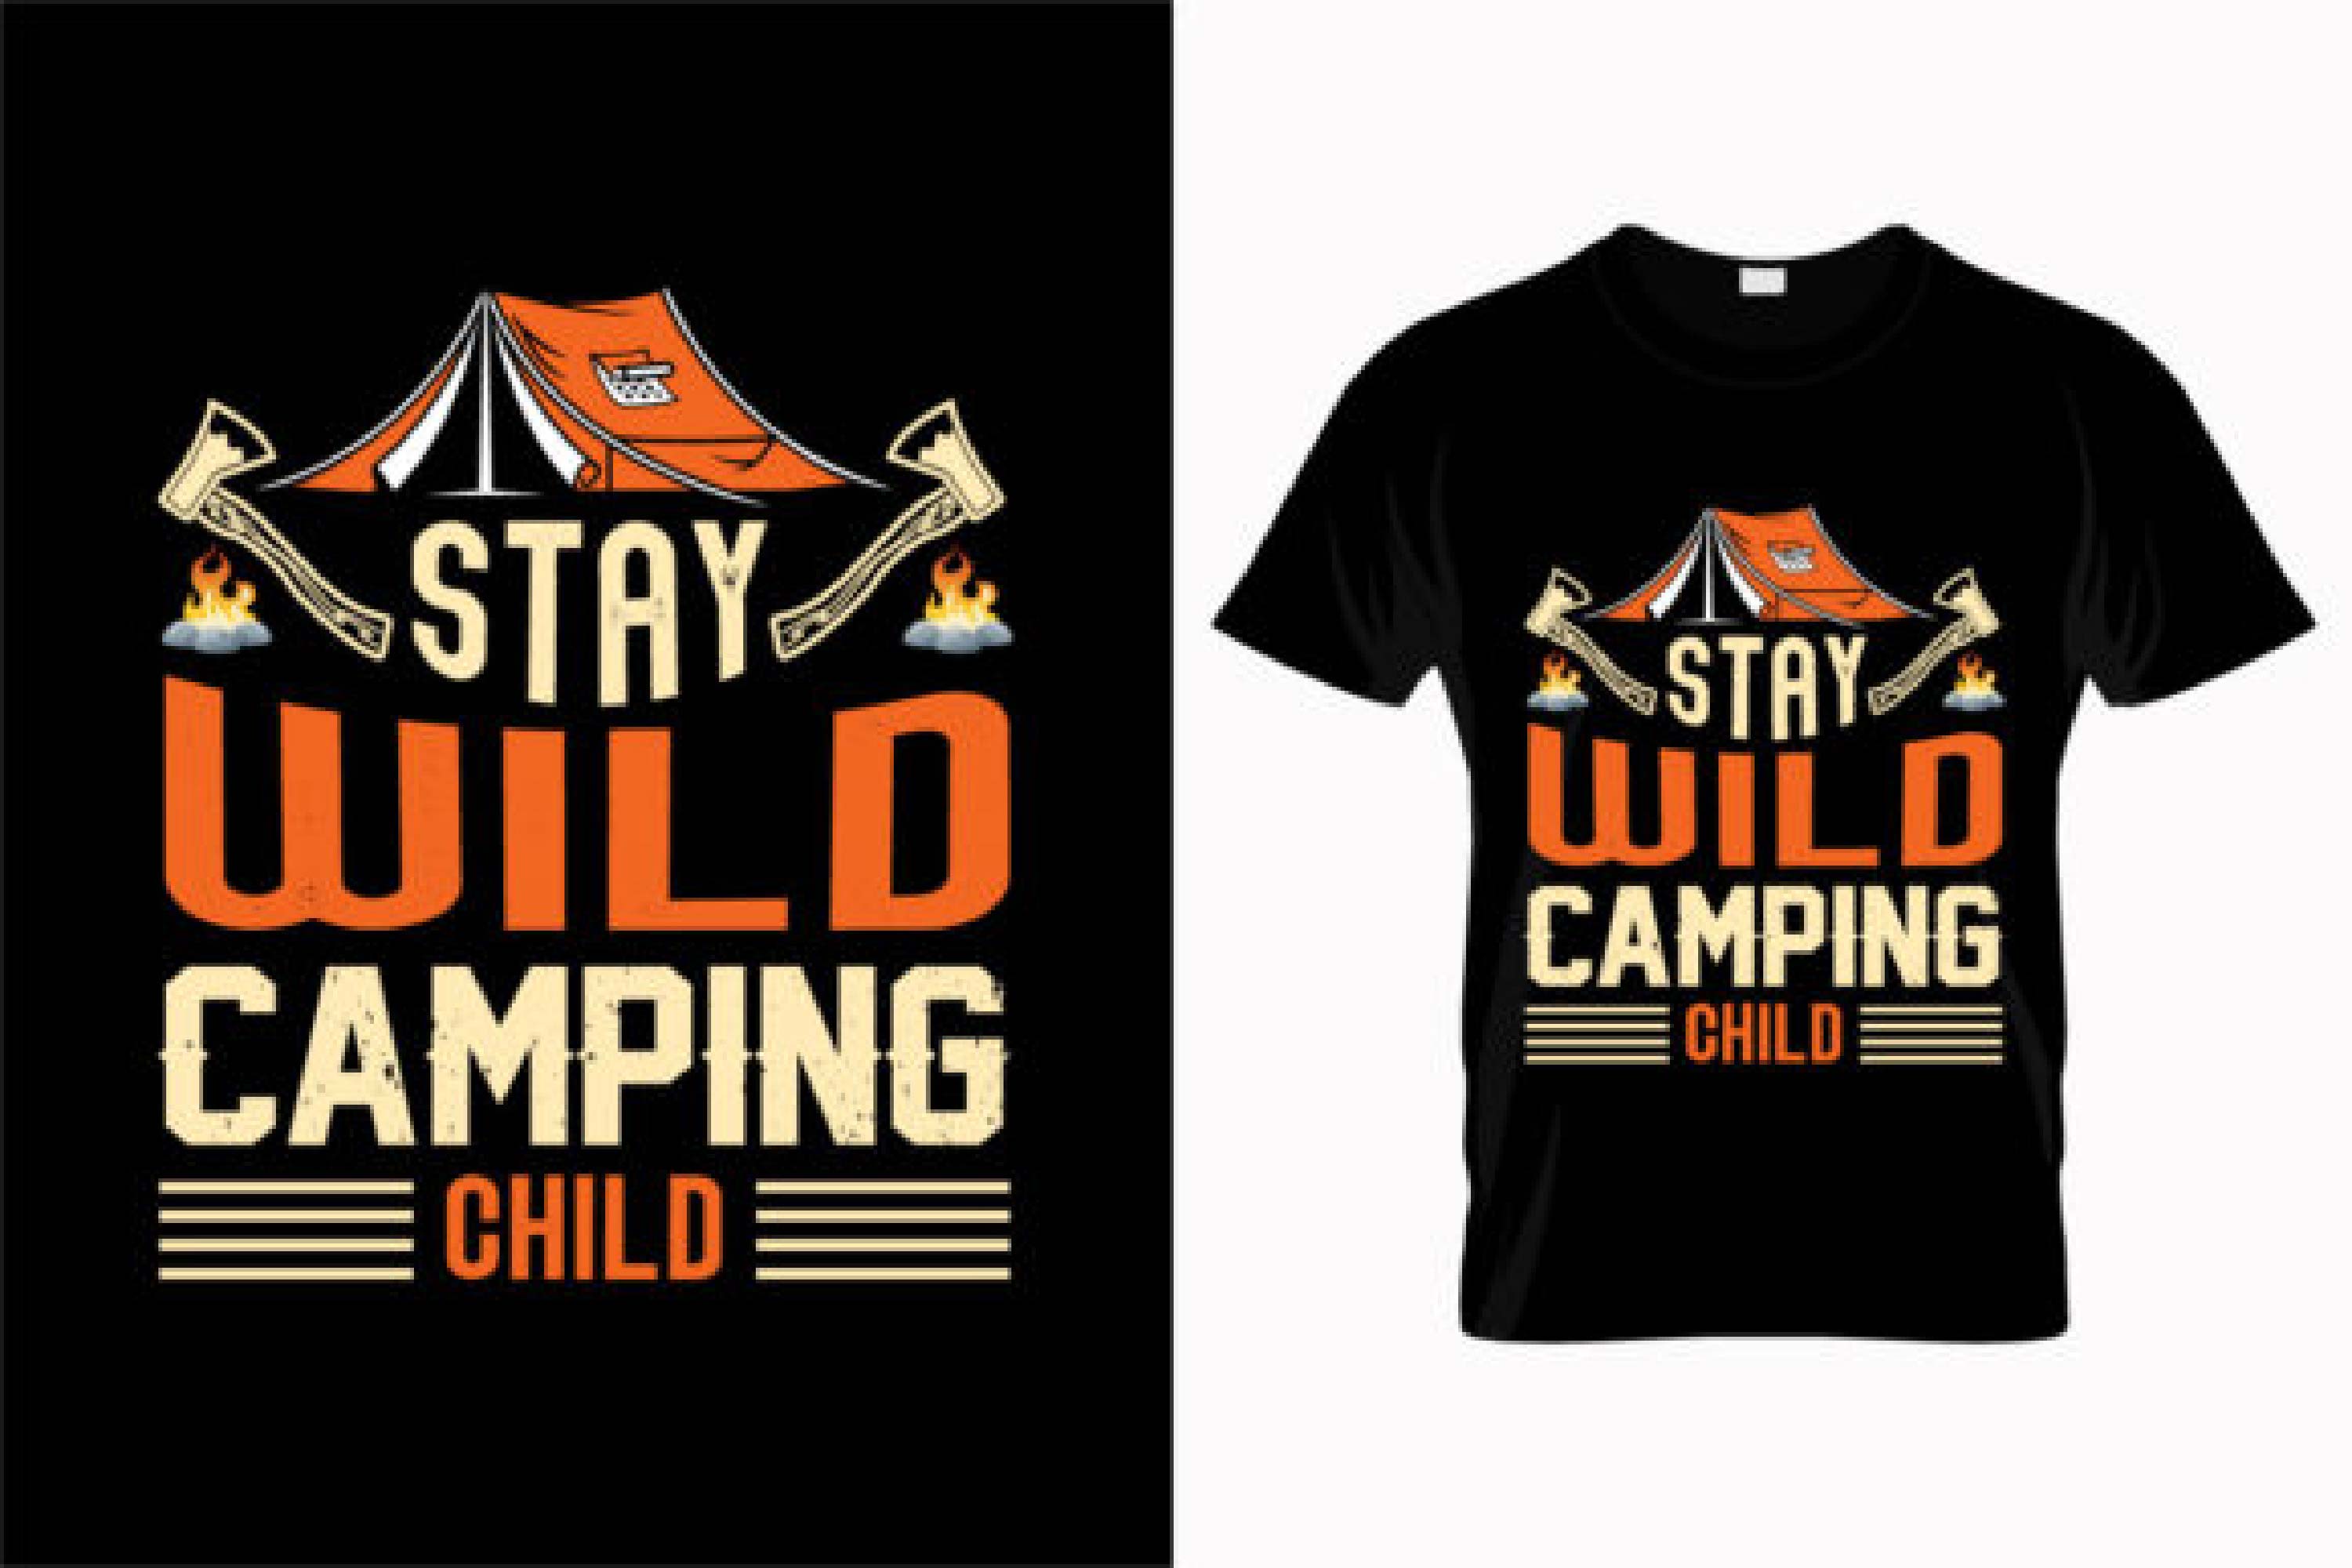 Image of a black t-shirt with a beautiful print on the theme of camping.